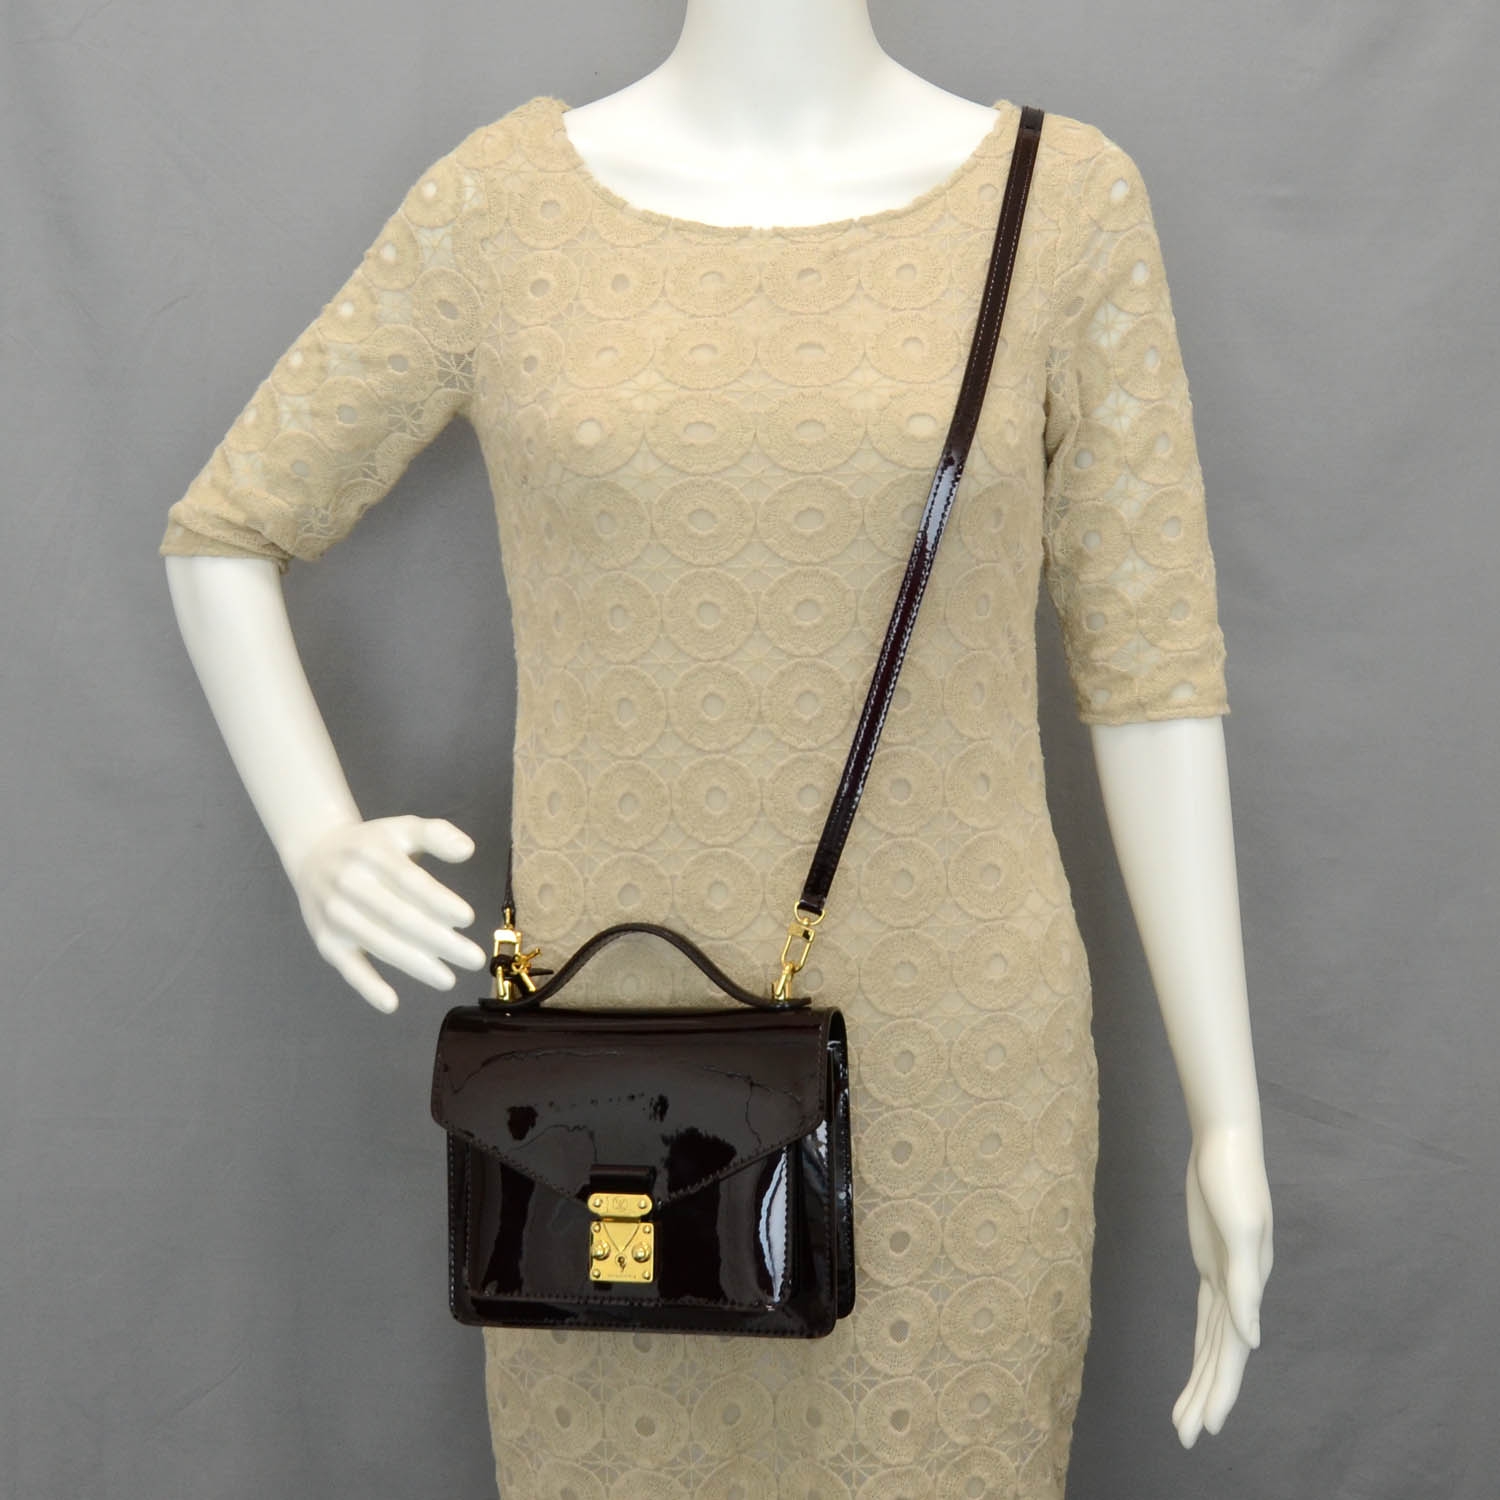 Vintage LOUIS VUITTON Monceau Black Shoulder Bag Epi Leather with  Adjustable Strap and Box - Mrs Vintage - Selling Vintage Wedding Lace Dress  / Gowns & Accessories from 1920s – 1990s. And